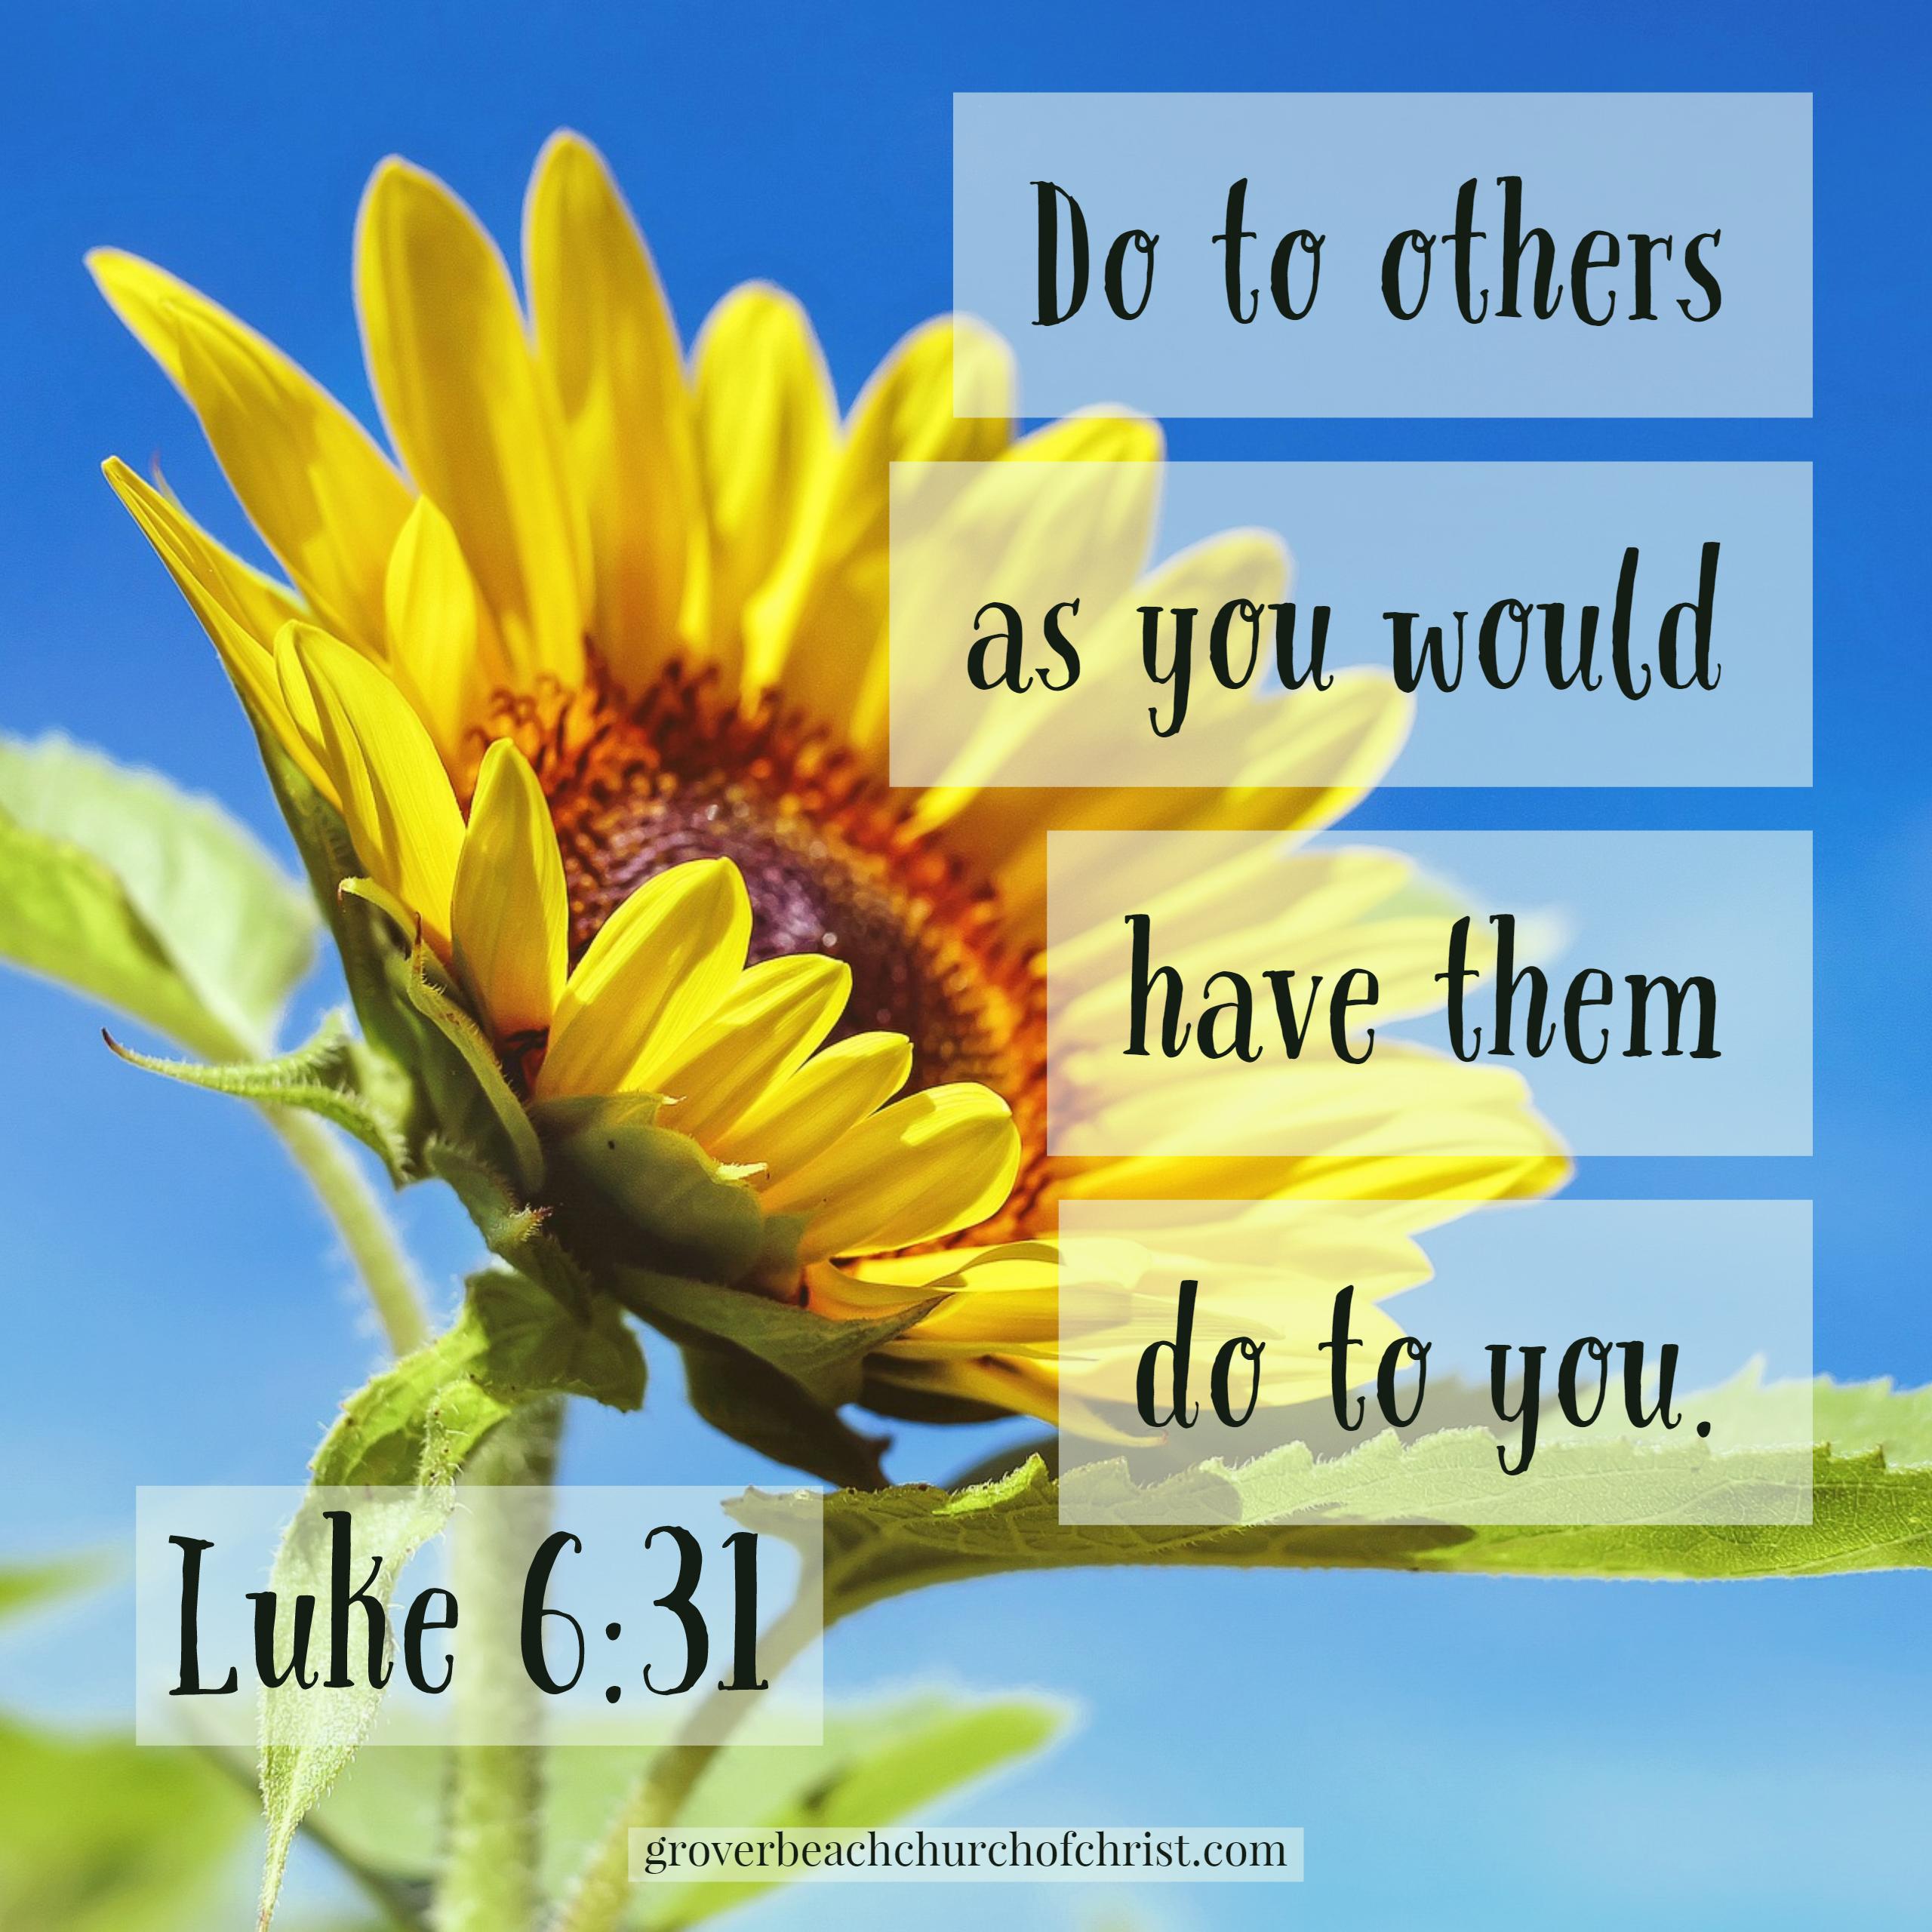 Luke 6:31 Do to others as you would have them do to you